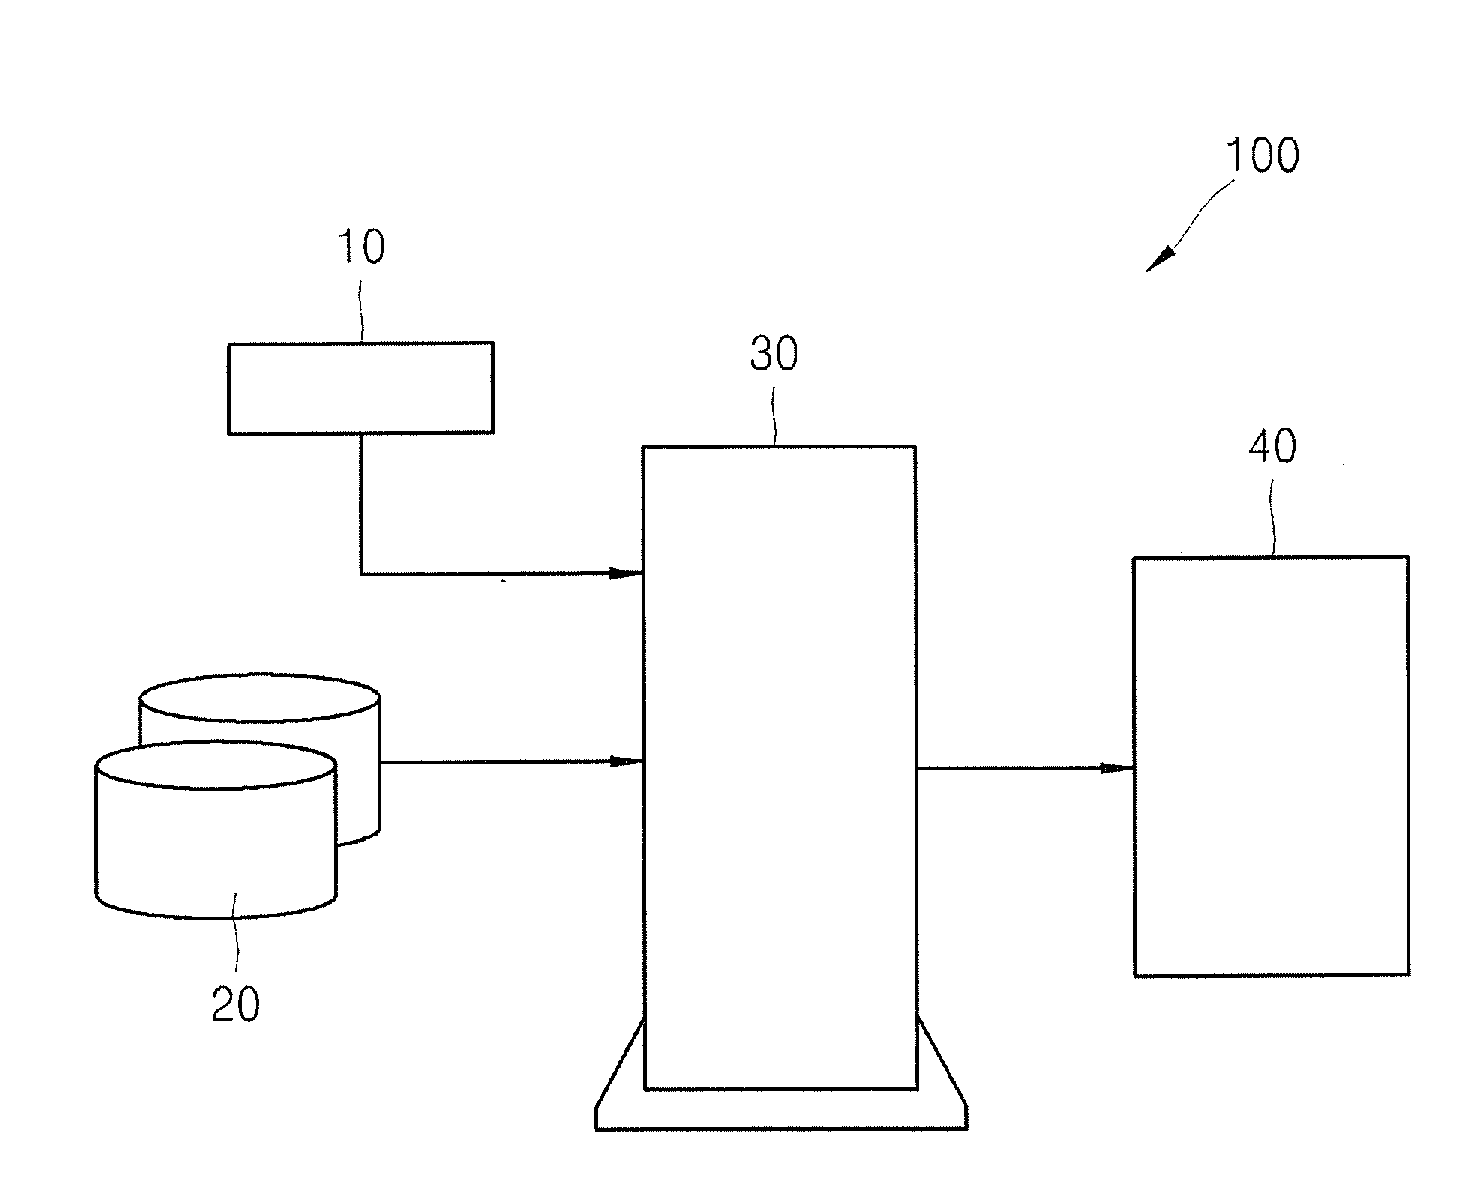 Method of creating mask layout image and imaging system